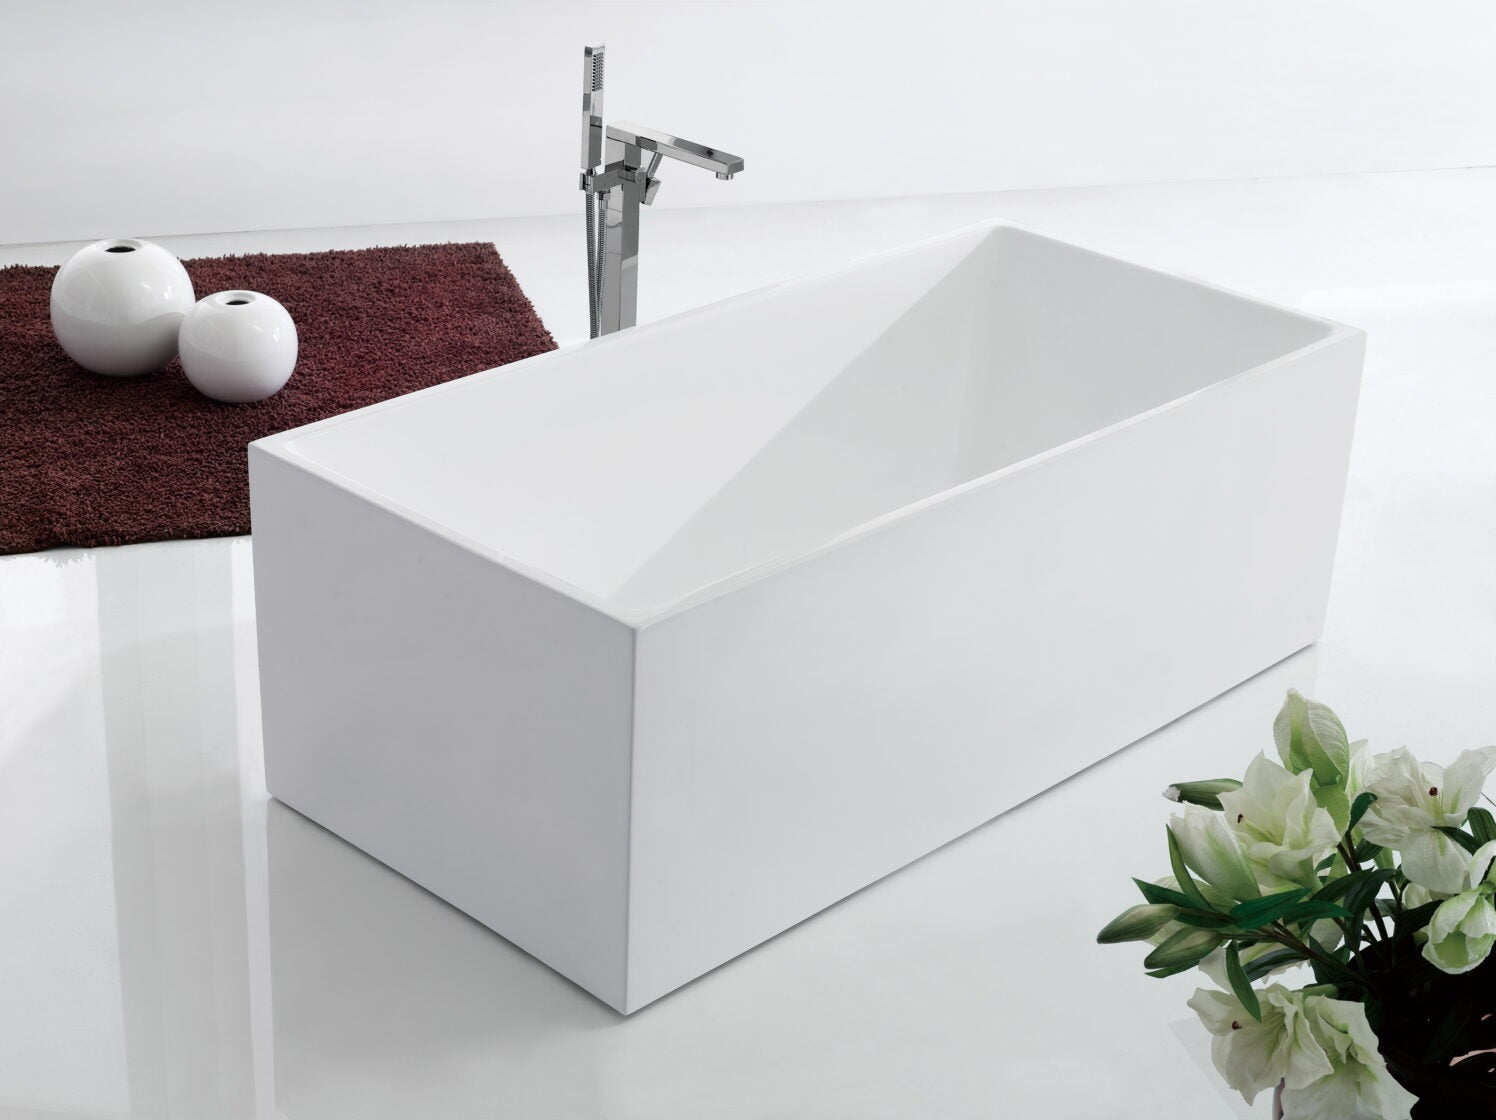 RIVA LOTUS FREESTANDING BATHTUB GLOSS WHITE (AVAILABLE IN 1200MM, 1300MM, 1400MM, 1500MM, 1600MM AND 1700MM